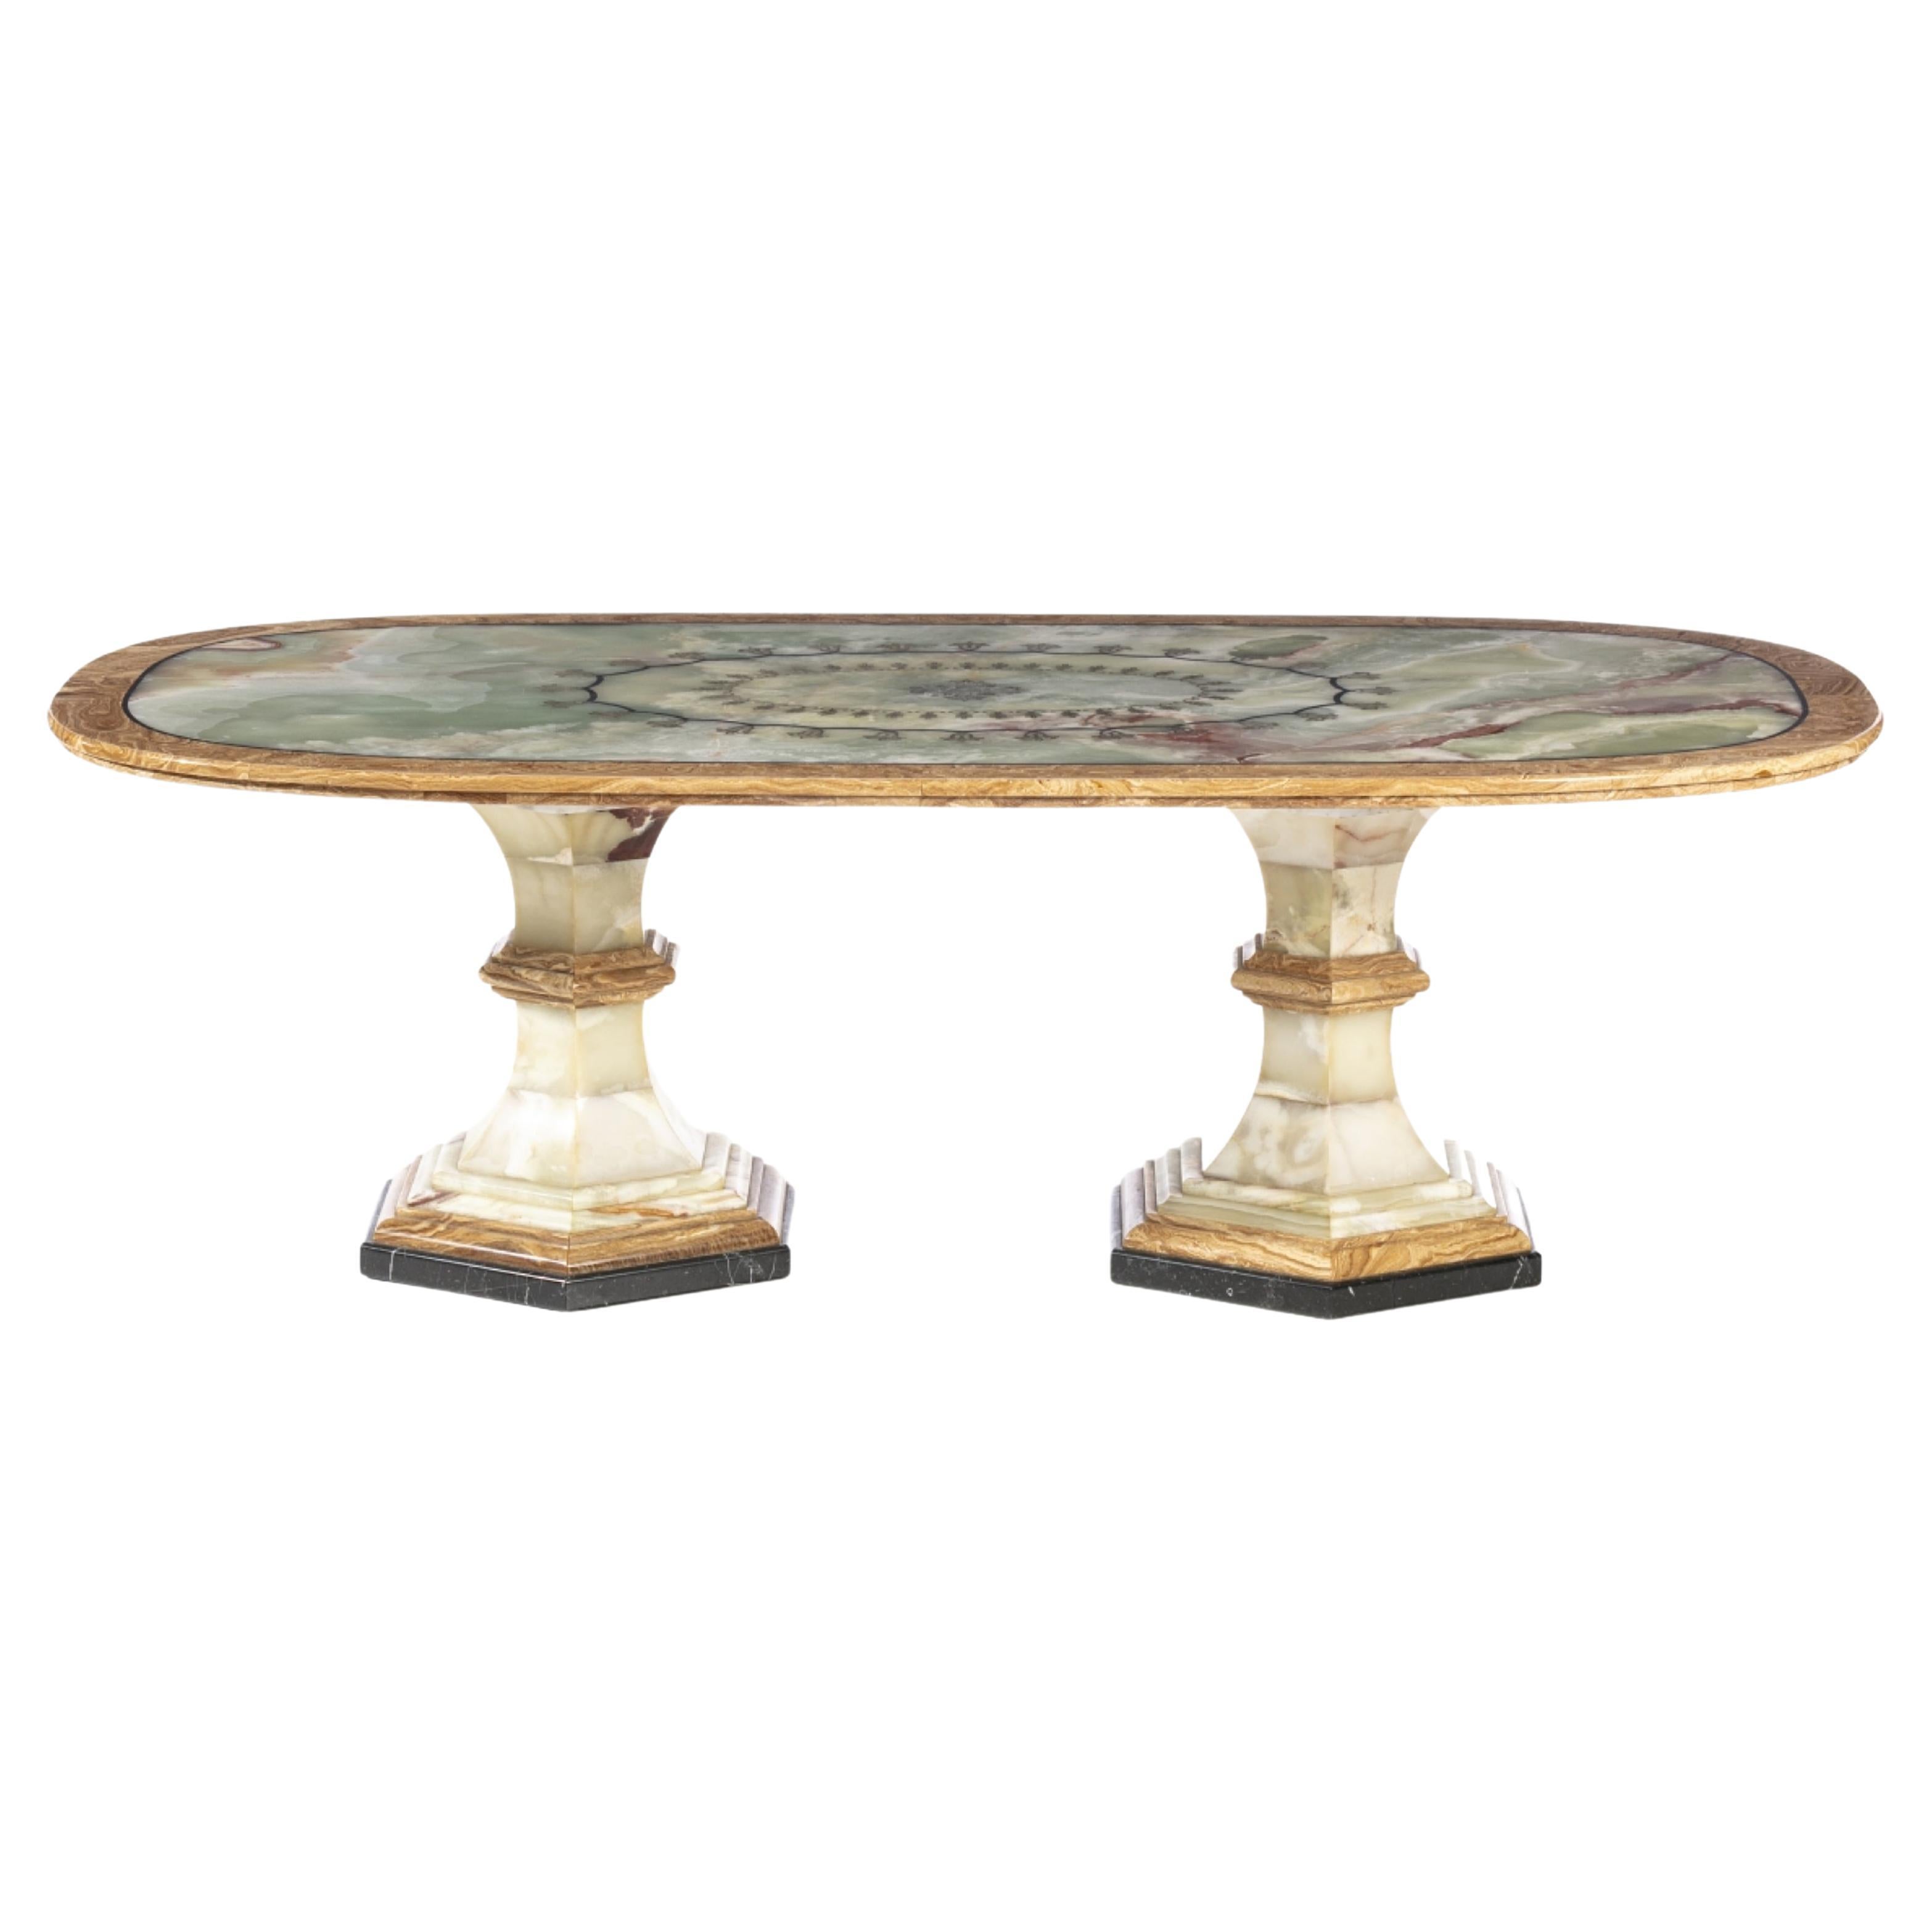 STUNNING ITALIAN OVAL DINING ROOM TABLE 20th Century  For Sale